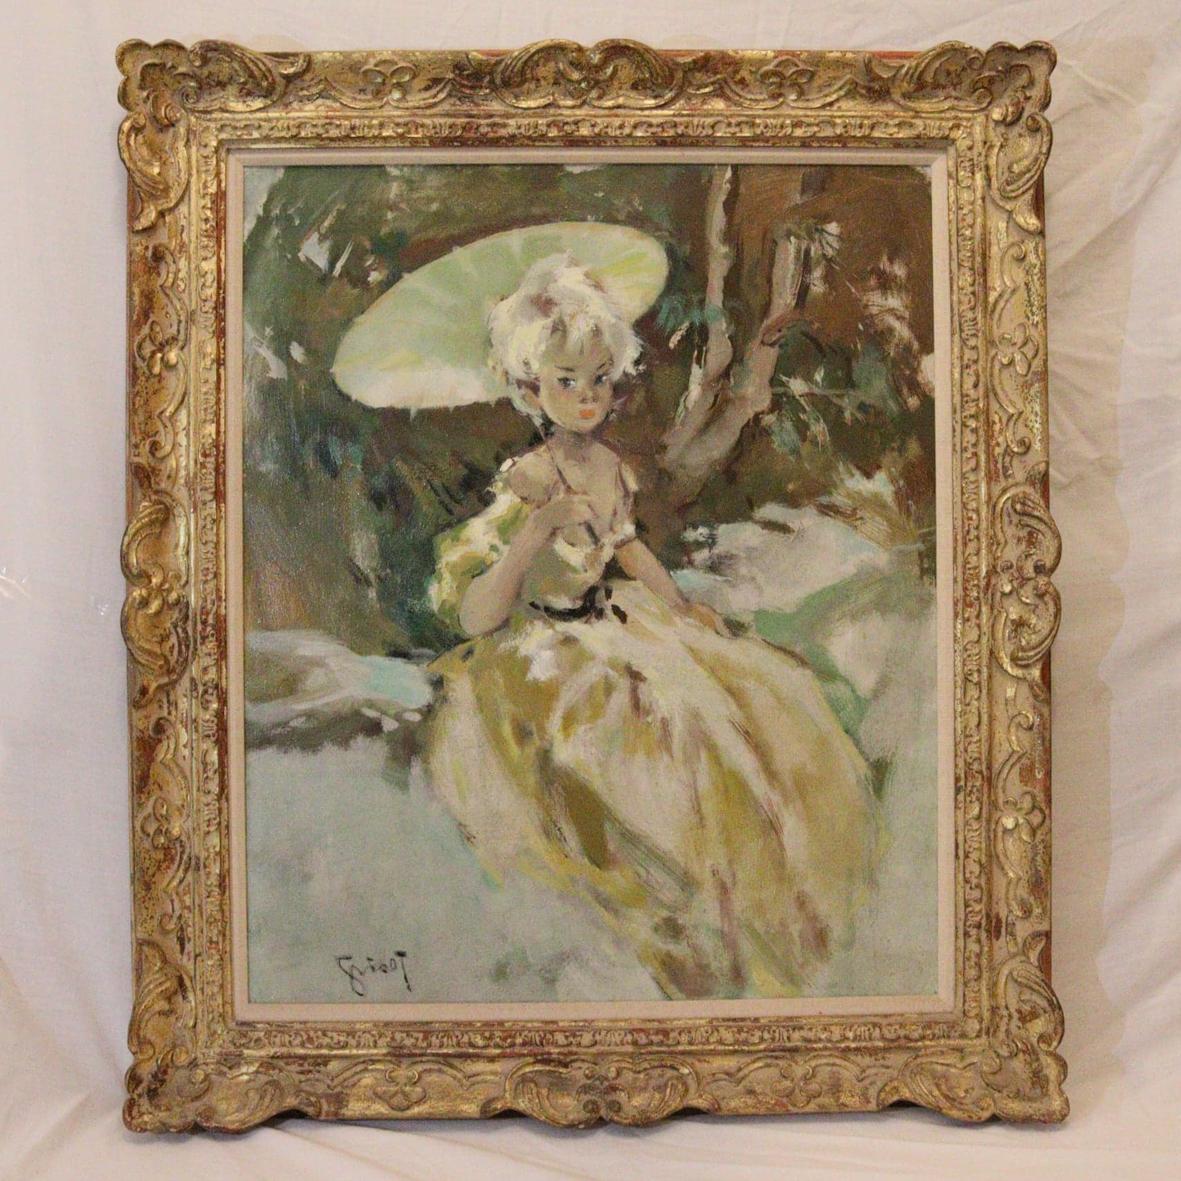 20th Century Oil on Canvas Painting entitled "Jeurne Fille Umbrille" by P Grisot